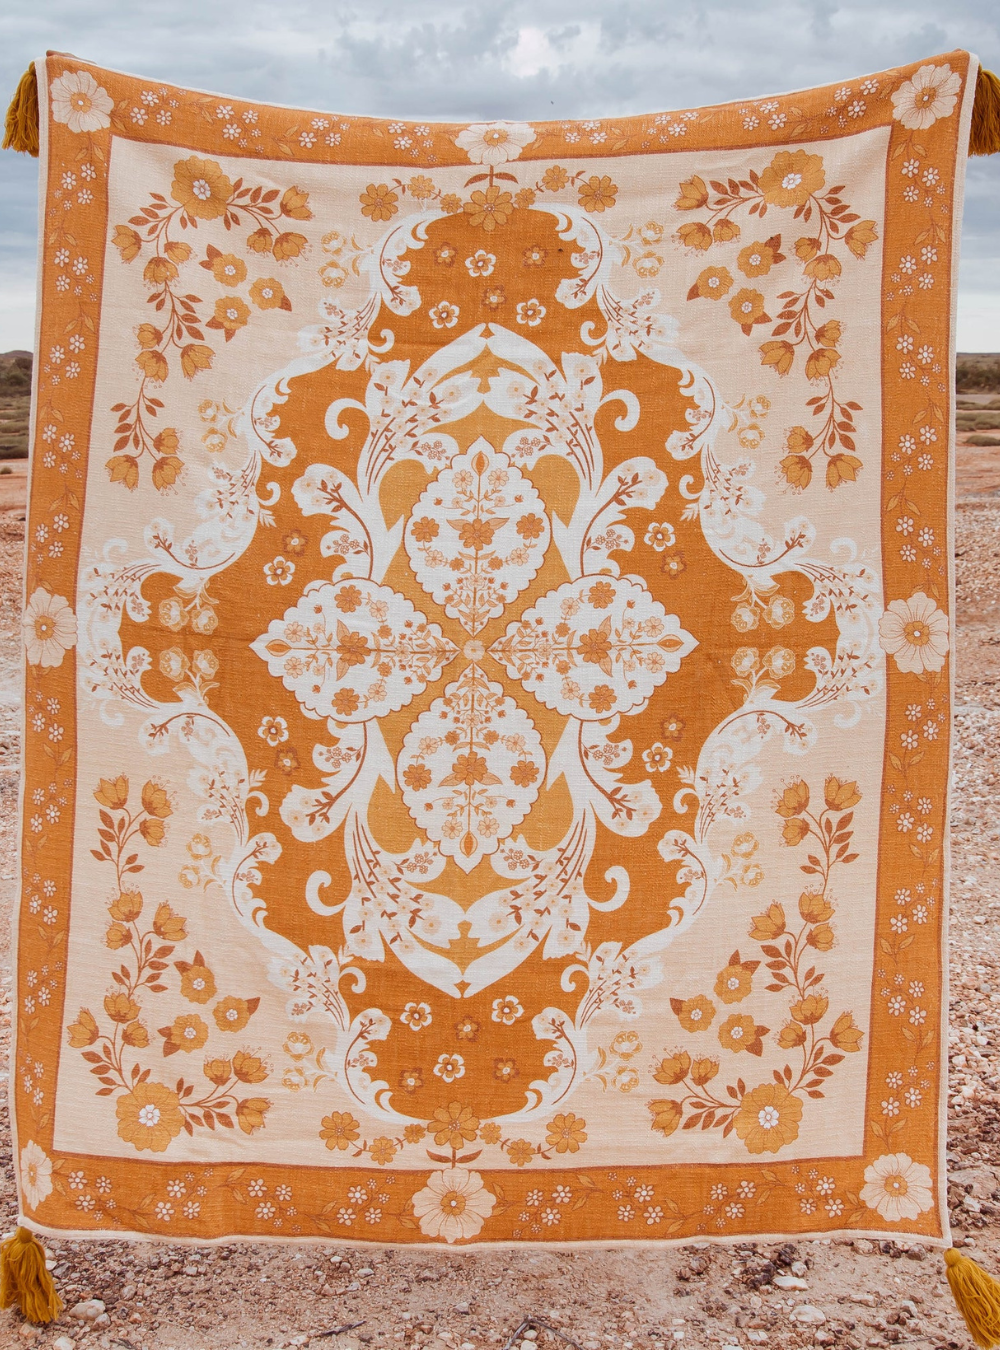 Enchanted Forest Throw Rug - Honey Ginger